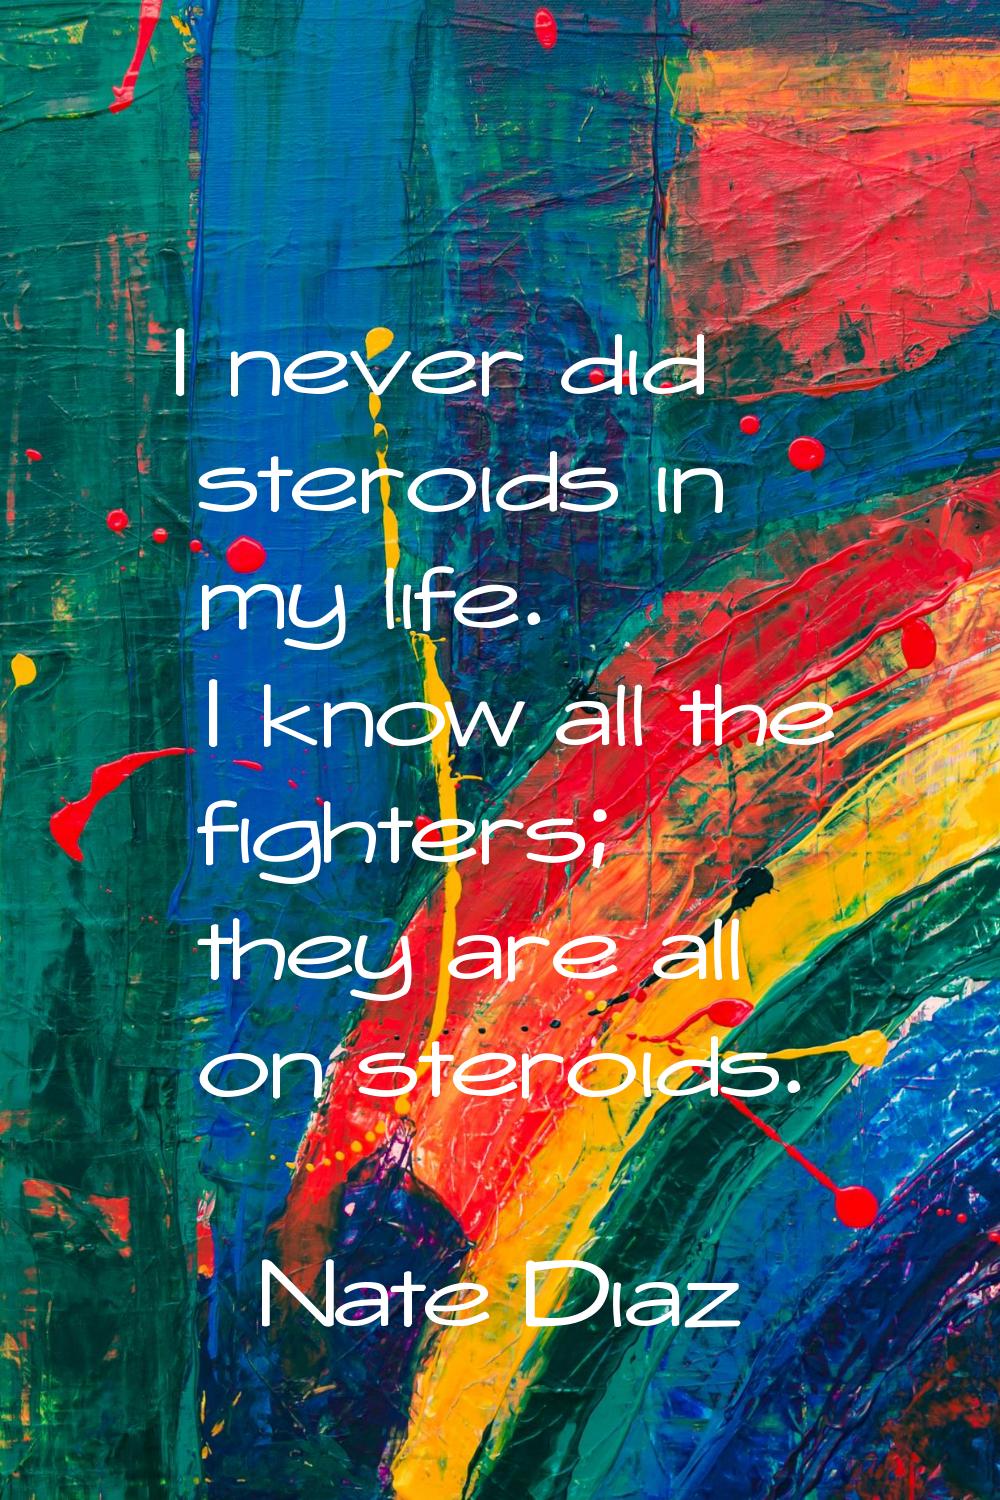 I never did steroids in my life. I know all the fighters; they are all on steroids.